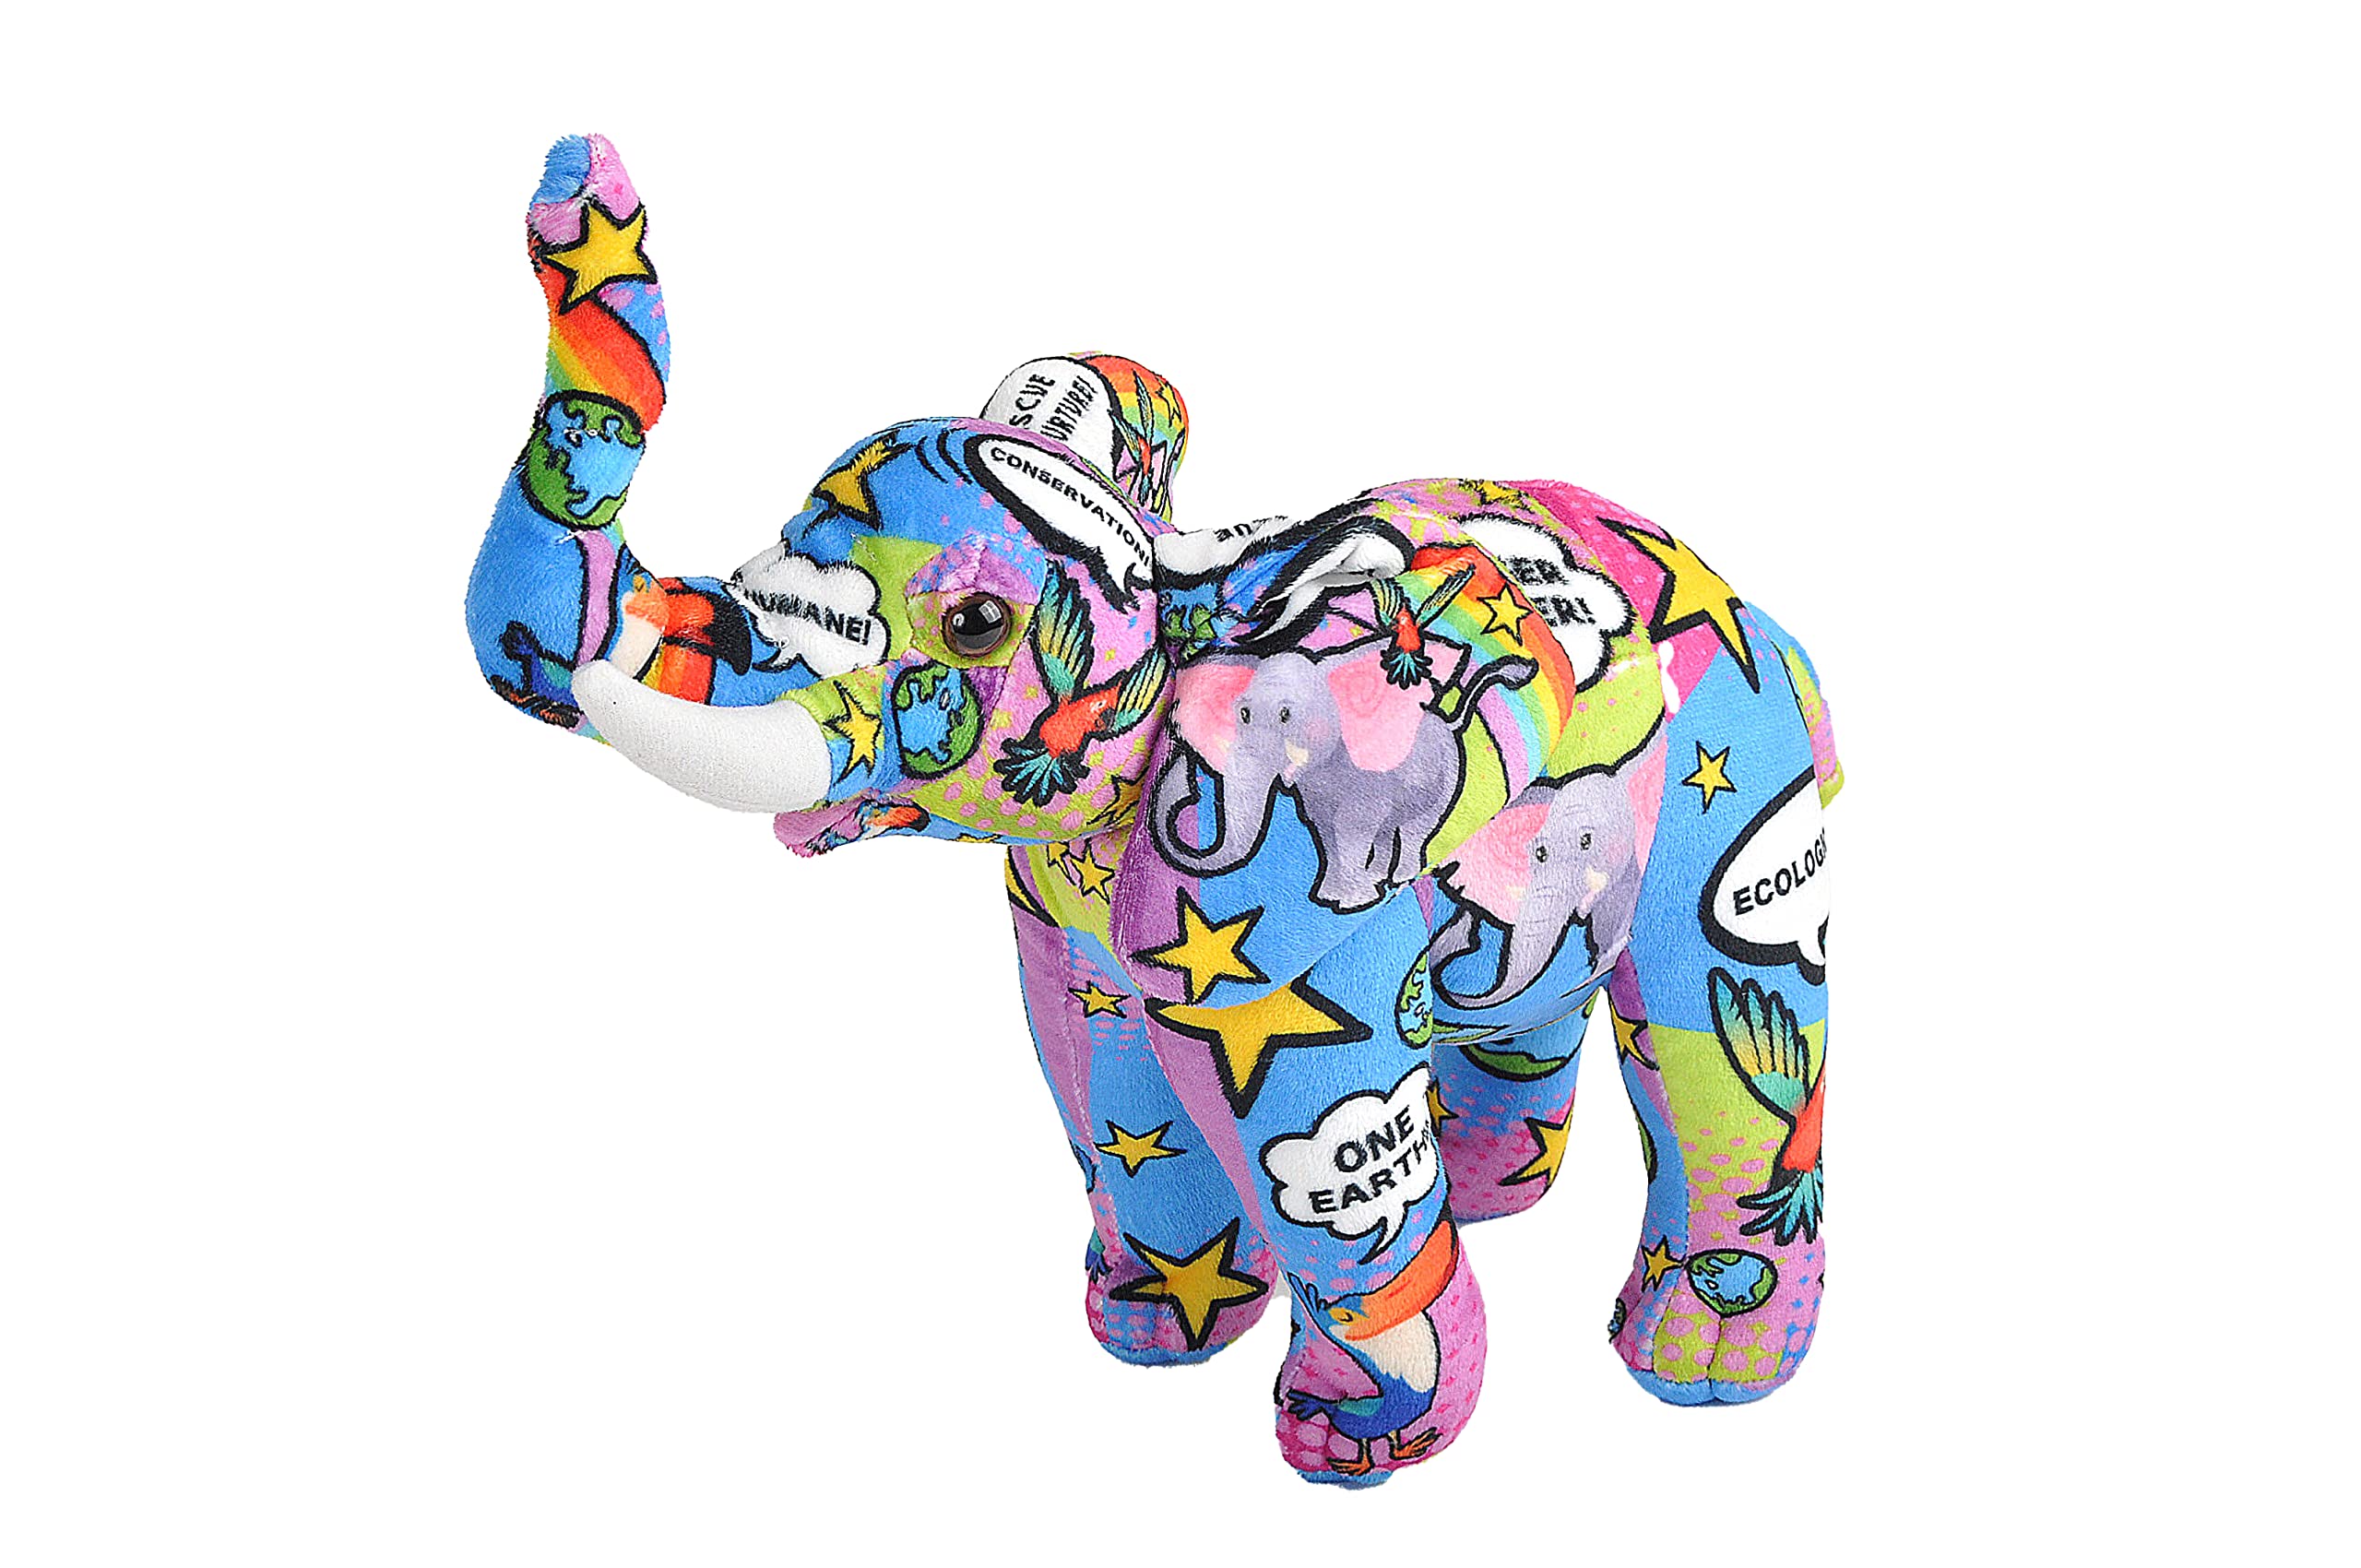 WILD REPUBLIC Message from The Planet, Elephant, Stuffed Animal, 12 inches, Gift for Kids, Plush Toy, Made from Spun Recycled Water Bottles, Eco Friendly, Child’s Room Decor